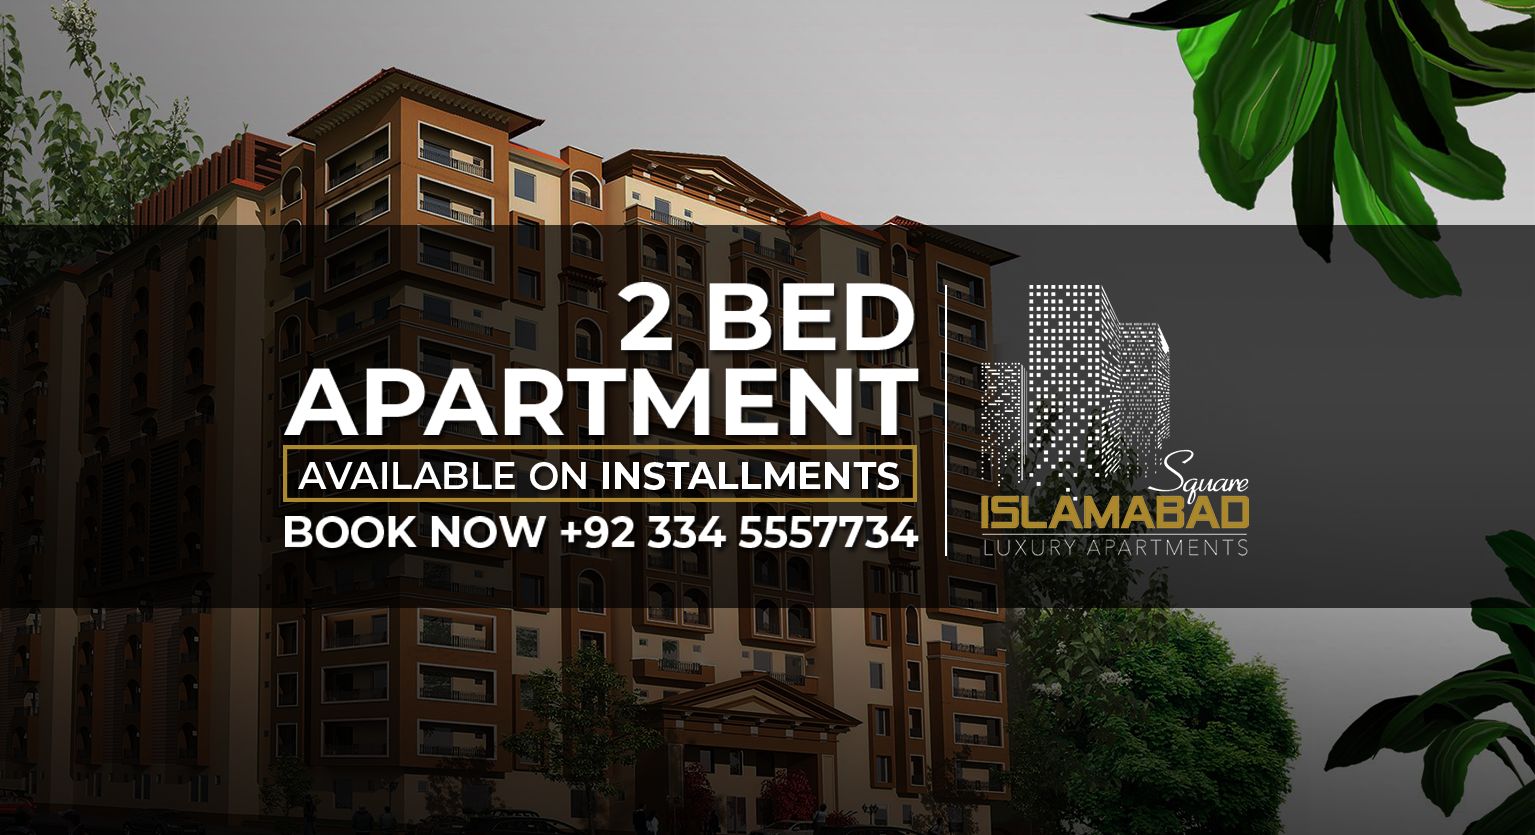 2 Bedrooms Apartment for Sale in Islamabad Square B-17